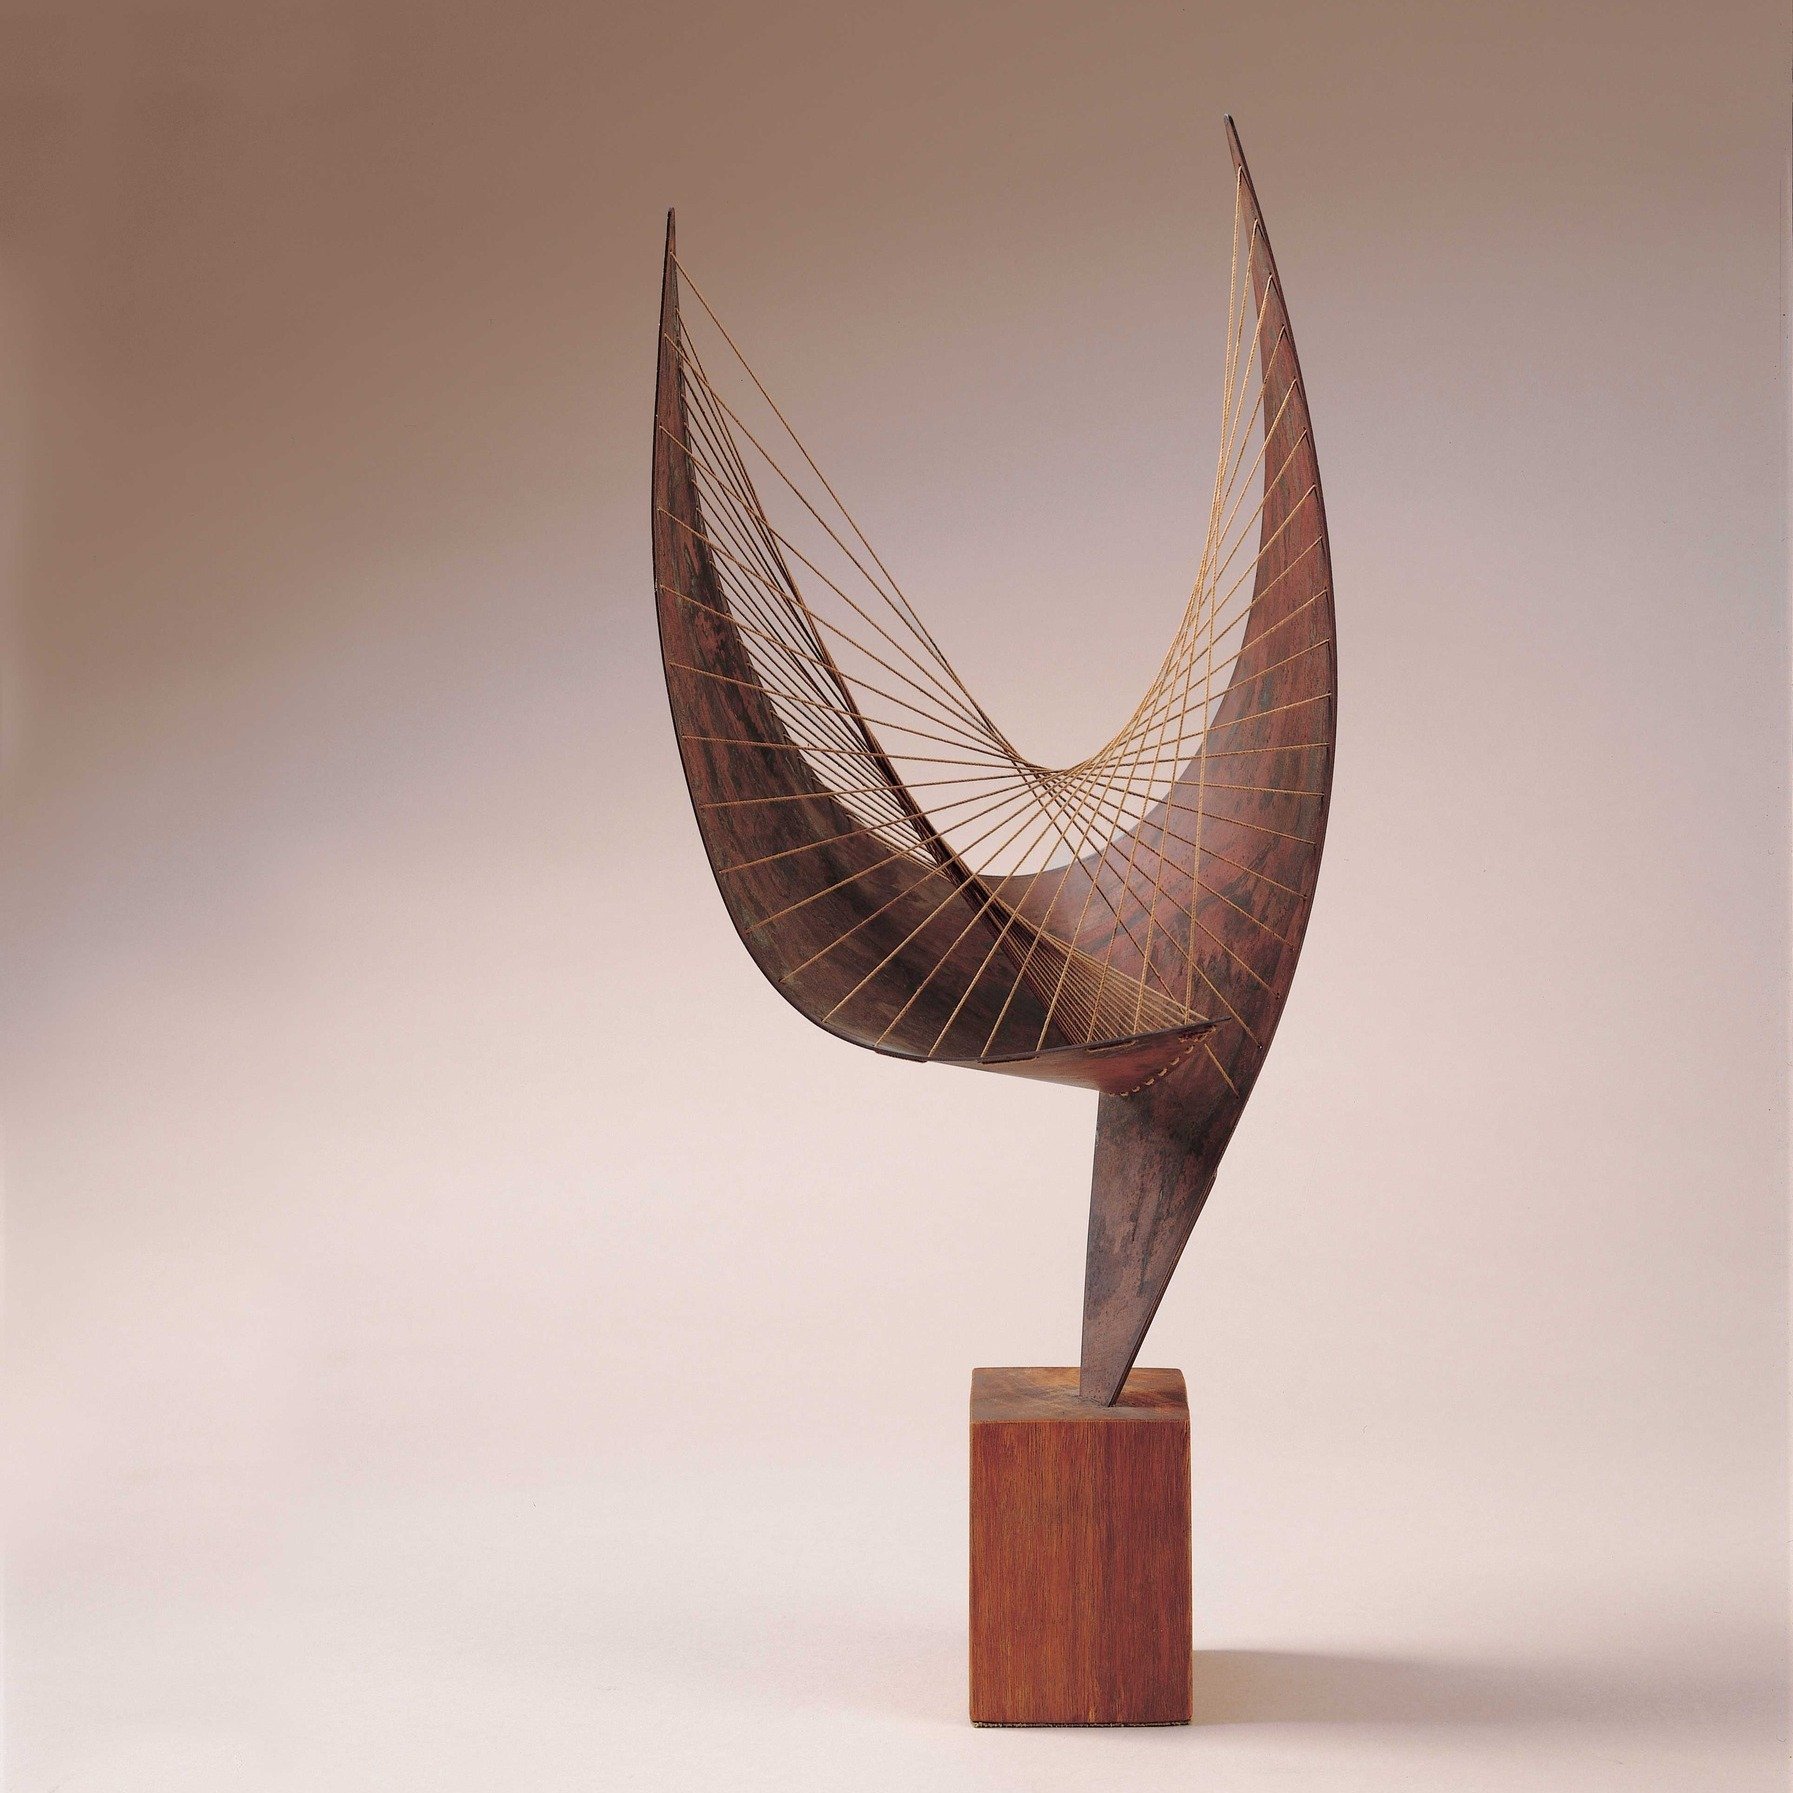 We have reached O in our alphabet of the Pier Arts Centre #WednesdayWorkoftheWeek 

Here's Orpheus (Maquette I) 1956 by Barbara Hepworth from our Collection

&copy; Bowness

#PierArtsCentre